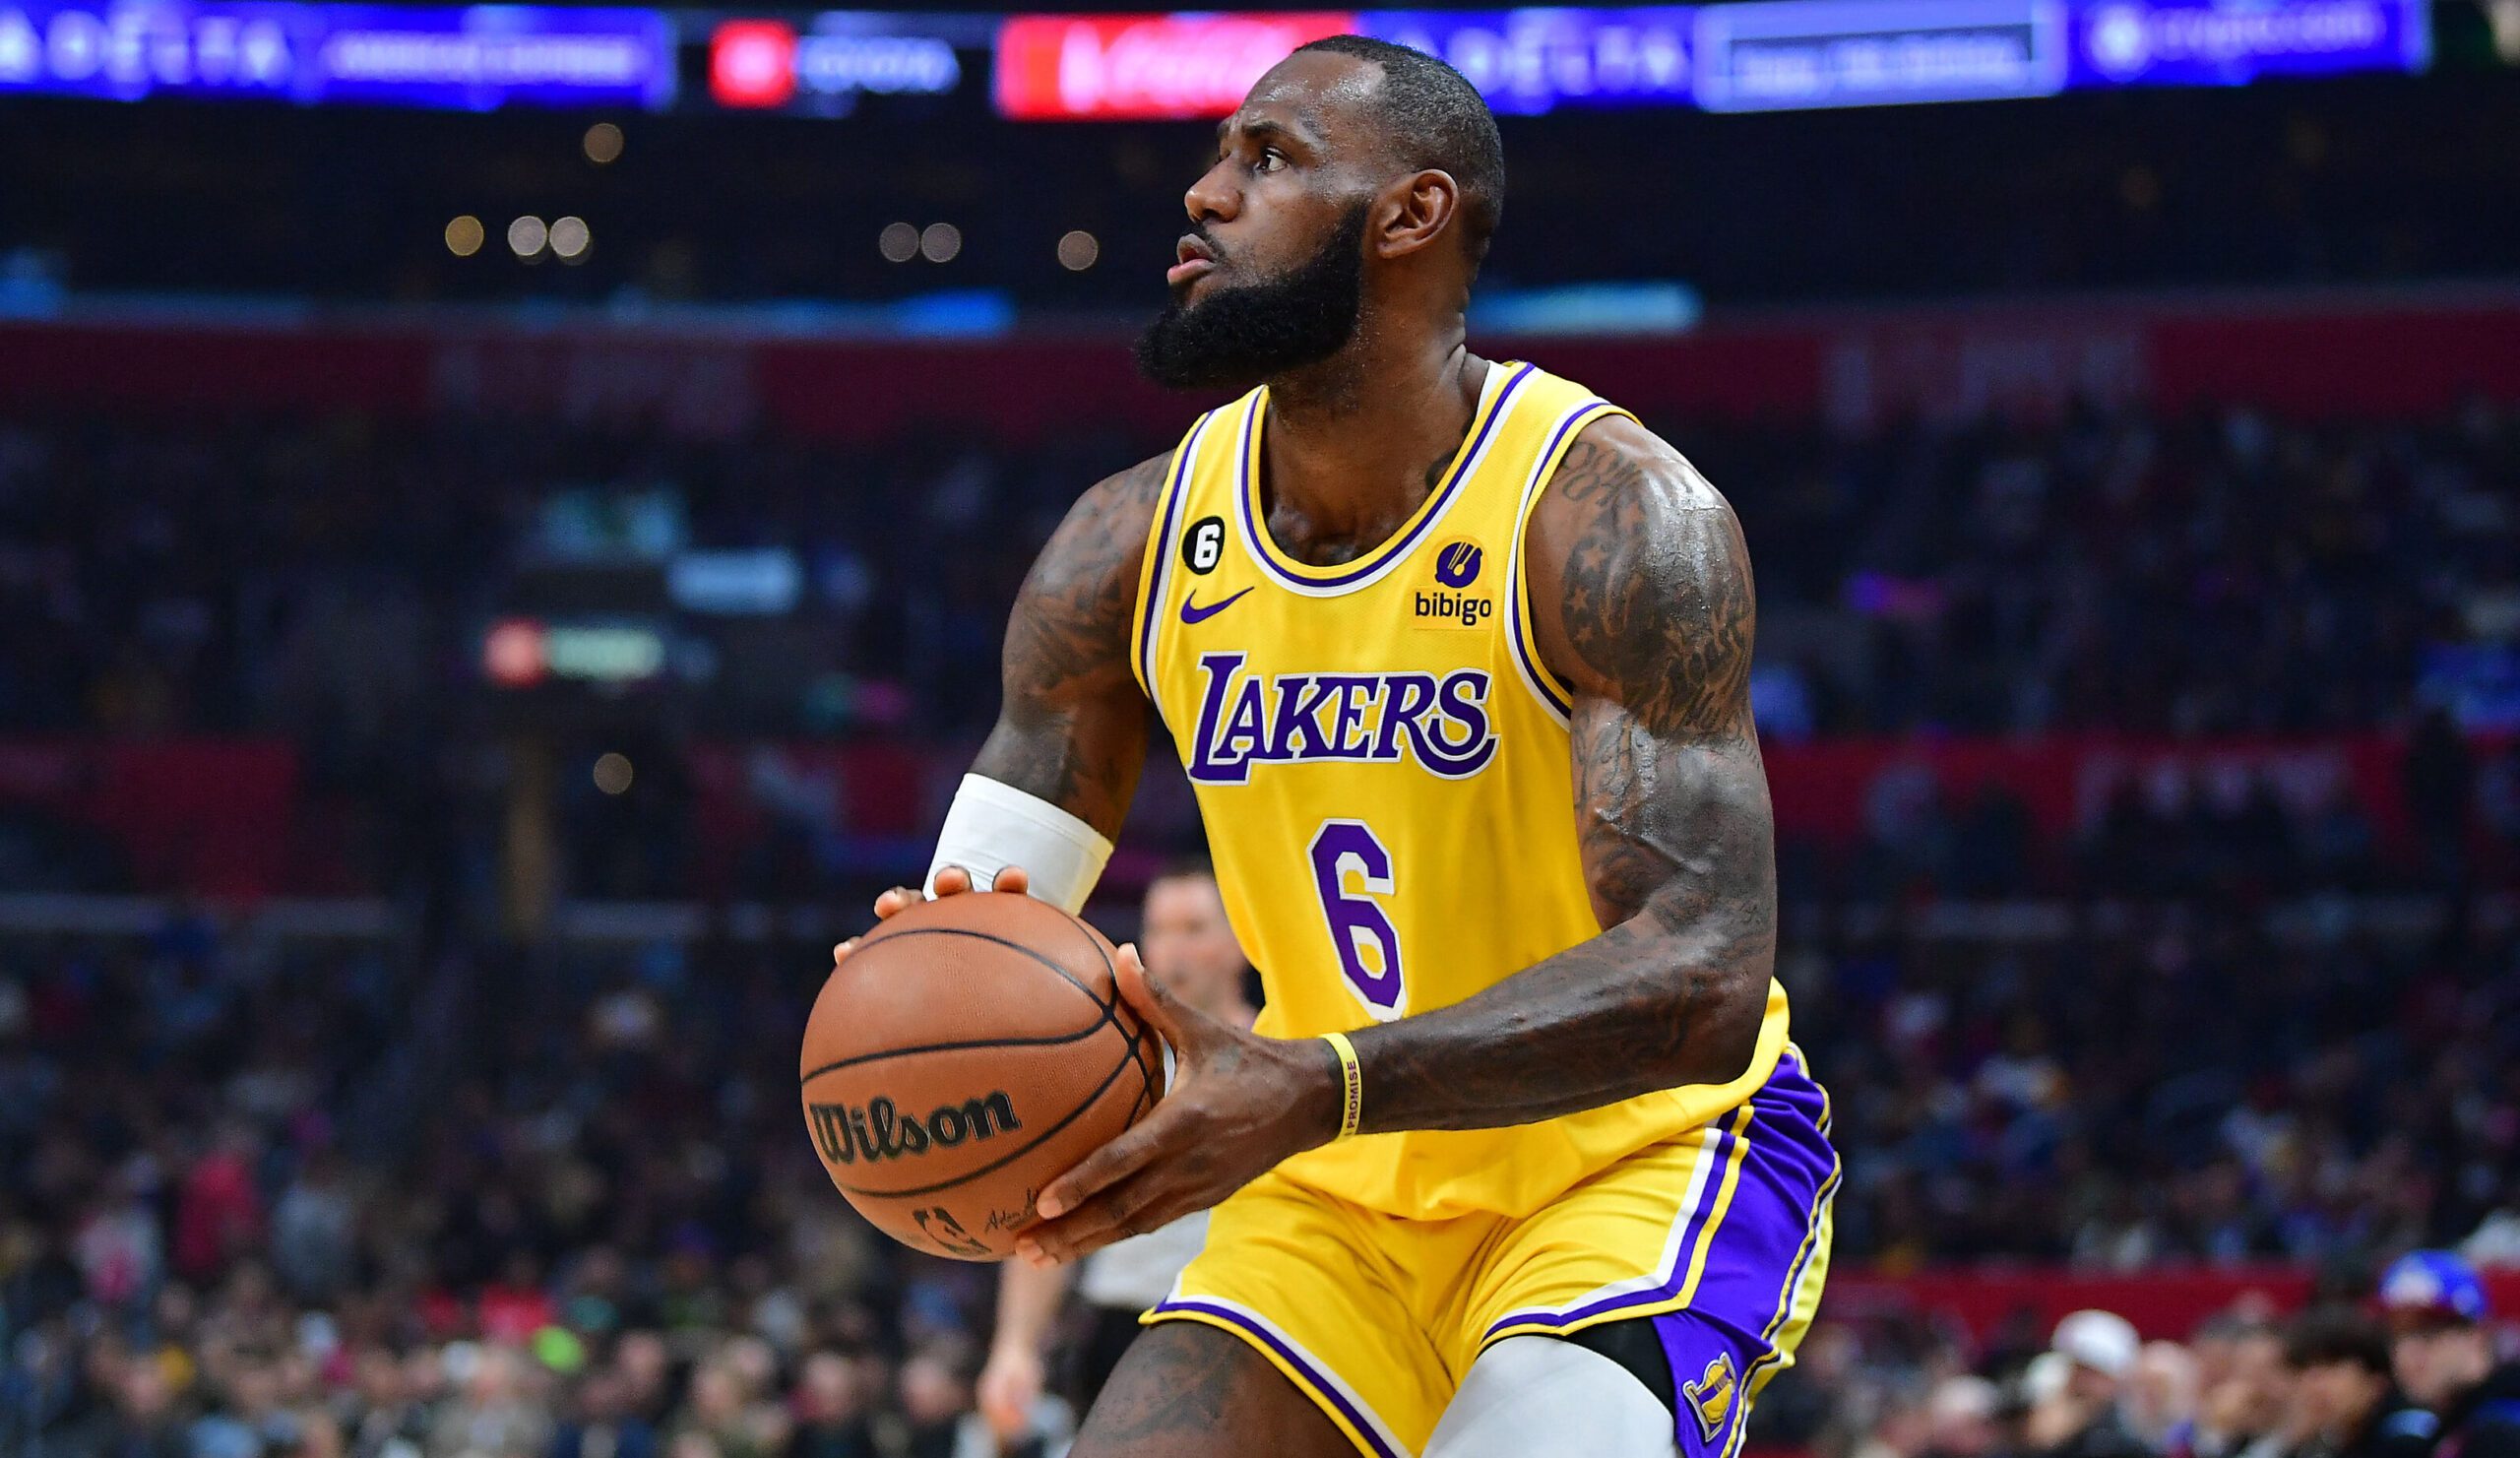 LeBron James day-to-day; doubtful for Lakers-Kings